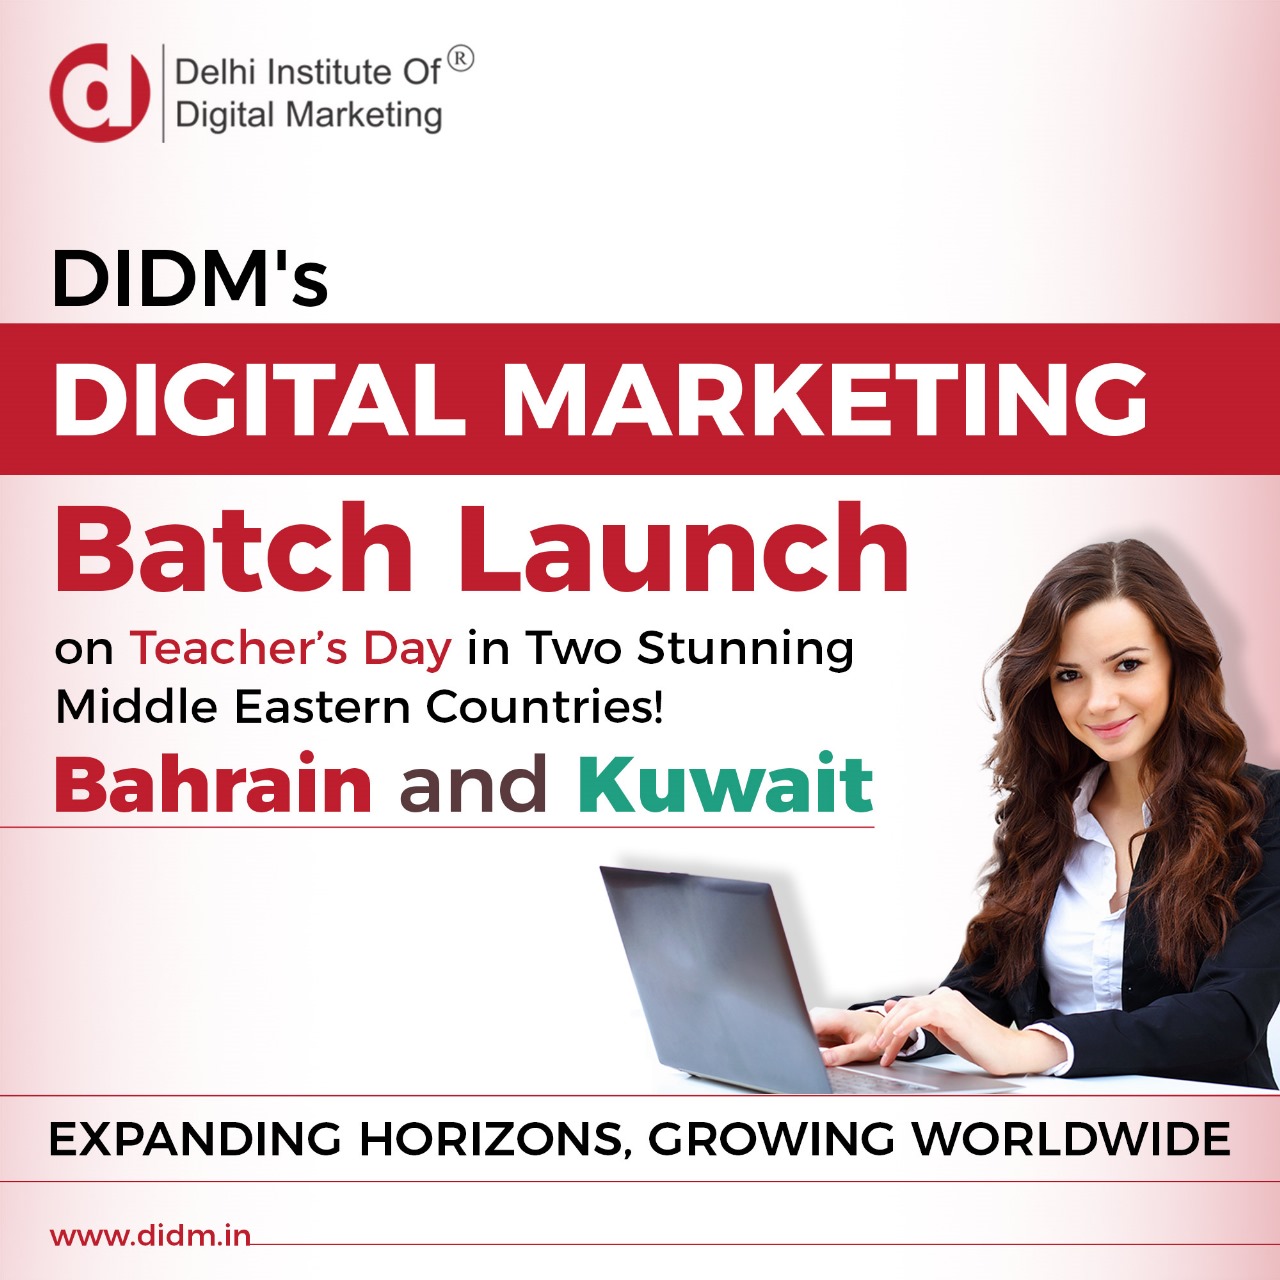 DIDM Celebrates Teacher’s Day with Exciting International Batch Launches